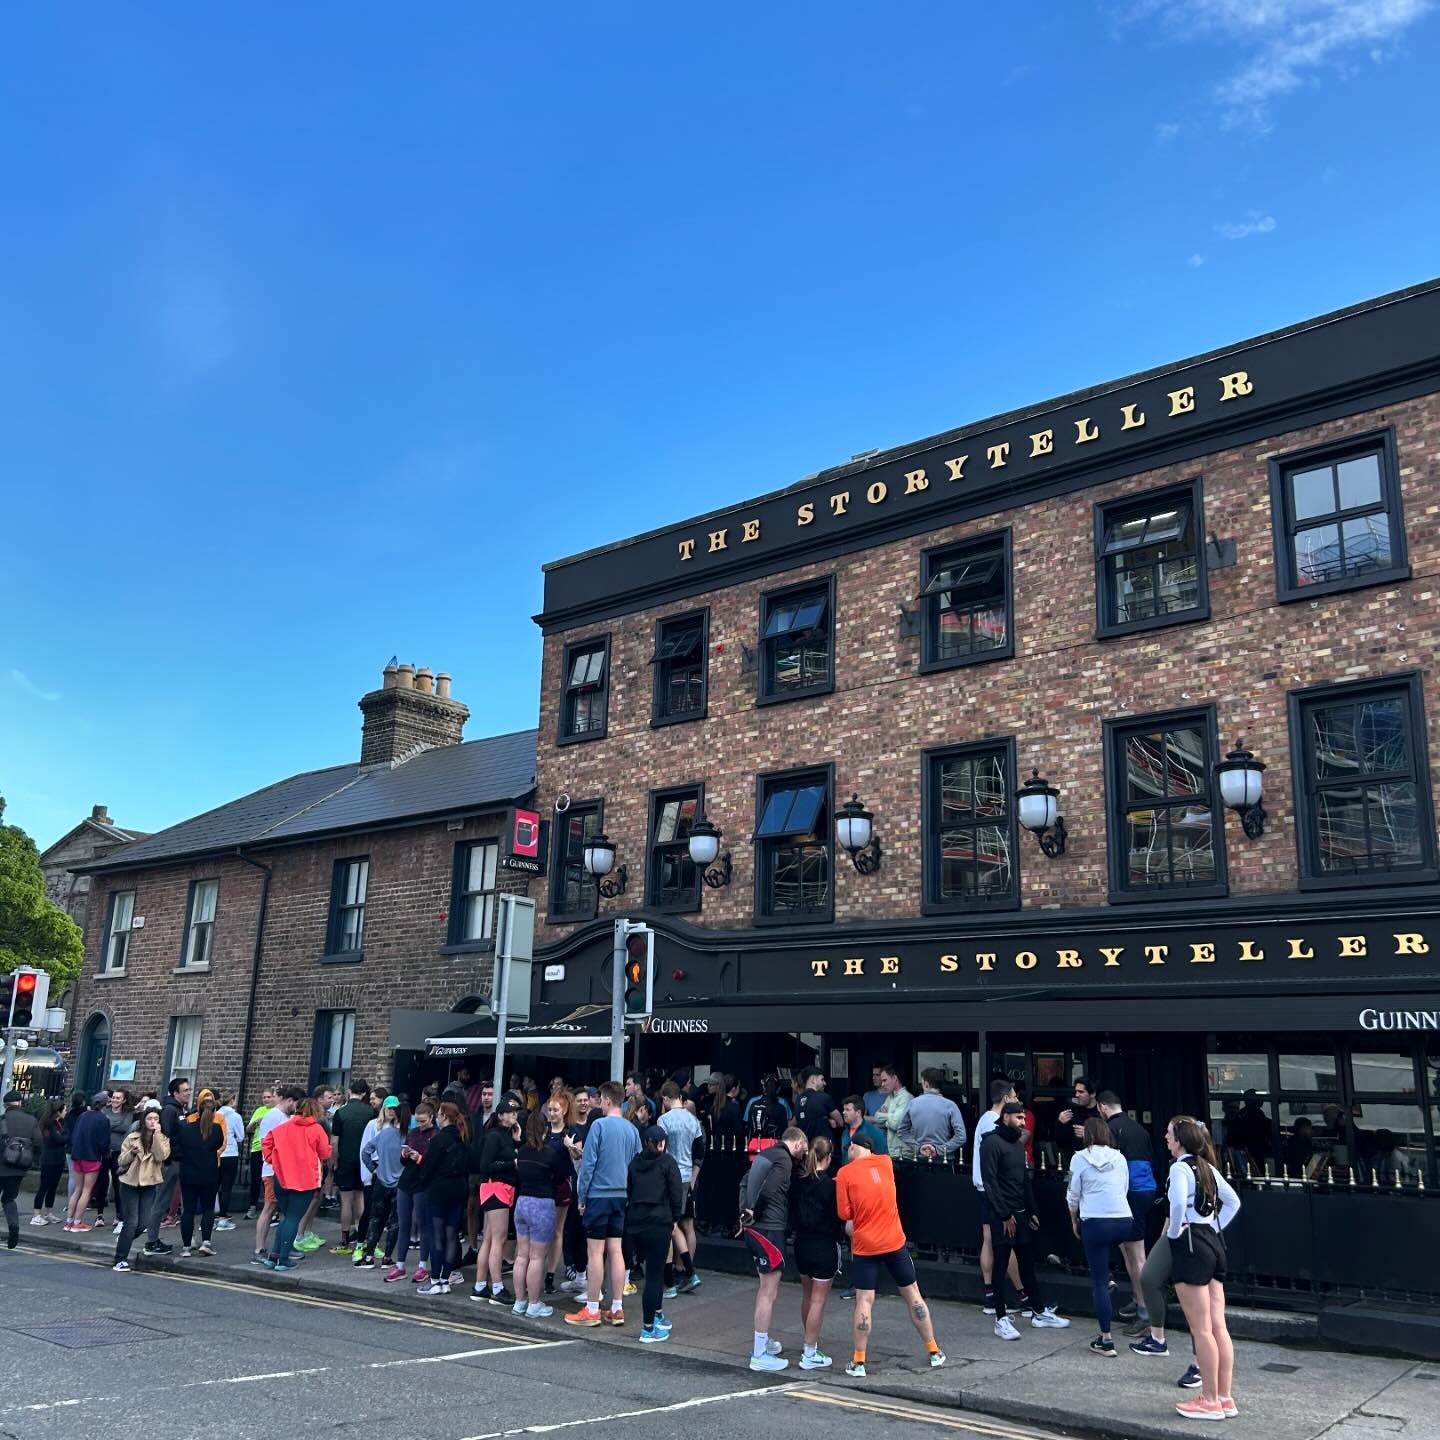 A whole week of the craic here in The Storyteller 👏🏼📍

What a week we had and what a banker it was to finish it off 😎

Runclub Tuesday, Quiz night Wednesday, live music with Gerry on Thursday, Day 2 wedding celebrations with music from Robbie Doy